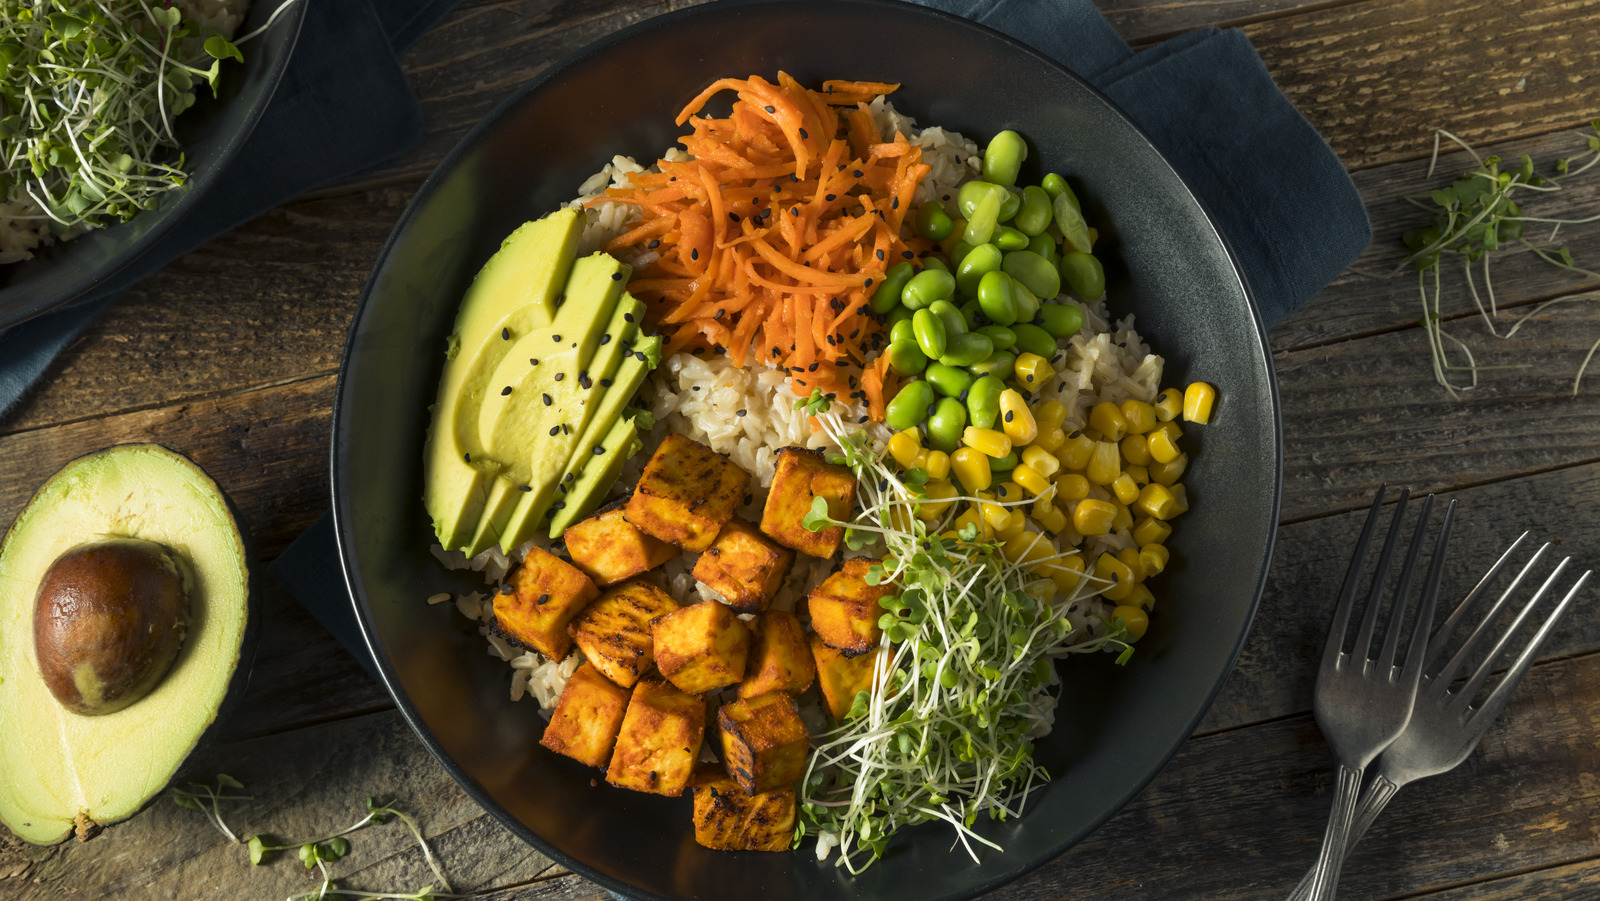 Easily Improve The Look Of Your Rice Bowls With Some Artful Arranging – The Daily Meal